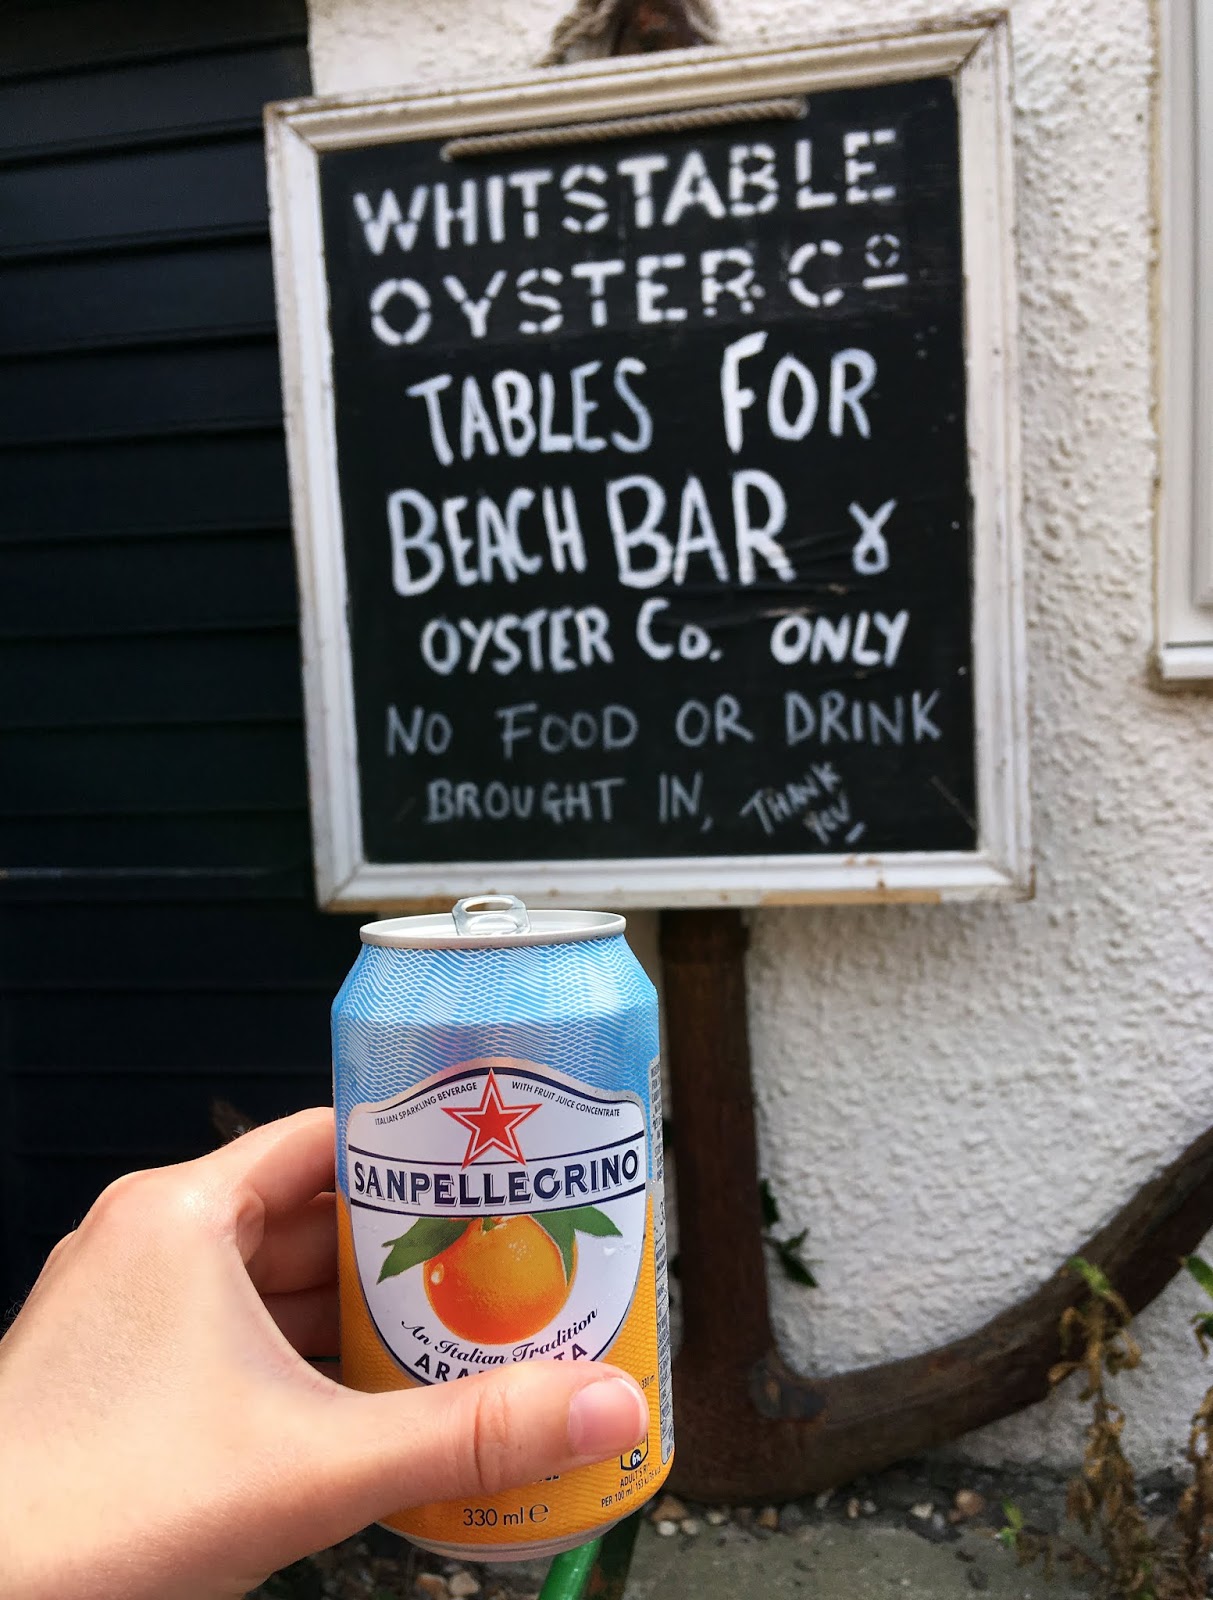 Having a San Pellegrino fizzy orange drink at the Whitstable Oyster Co. bar in Whitstable